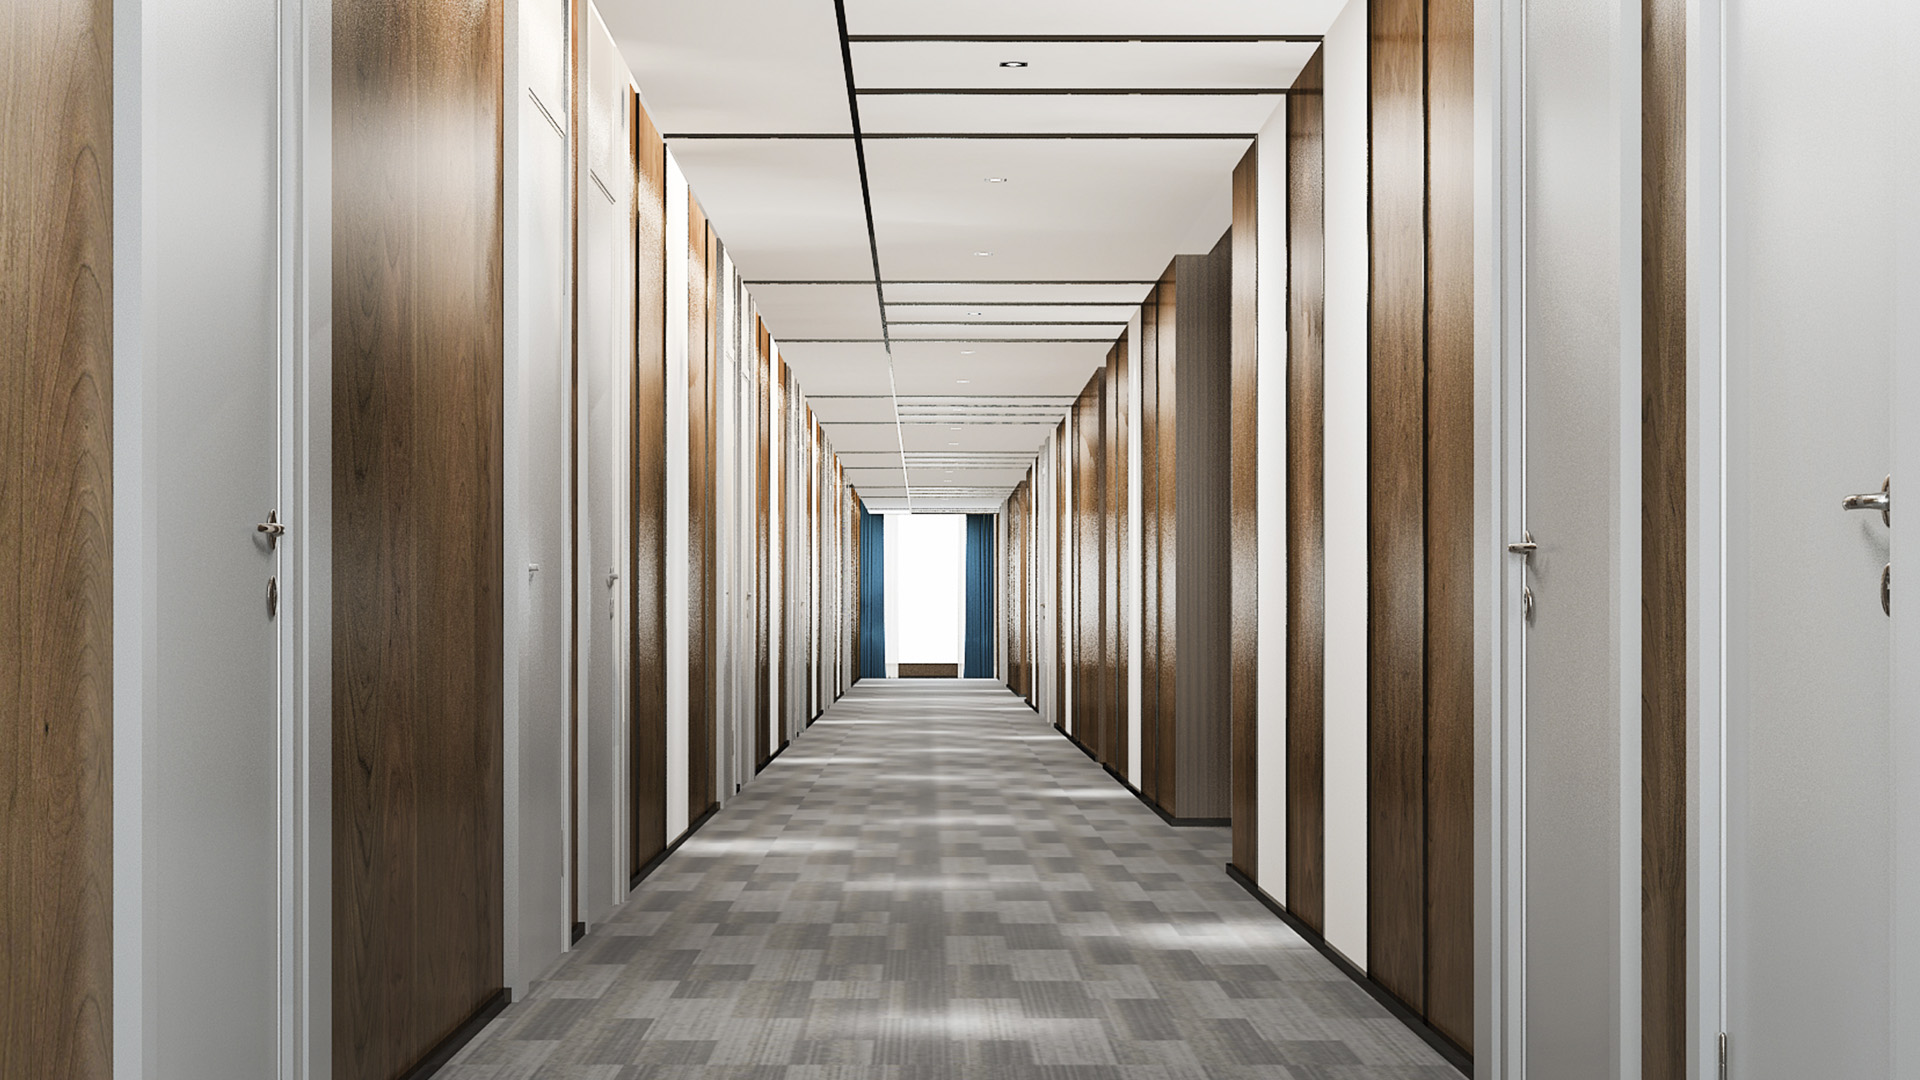 A picture of a long empty corridor leading towards the door